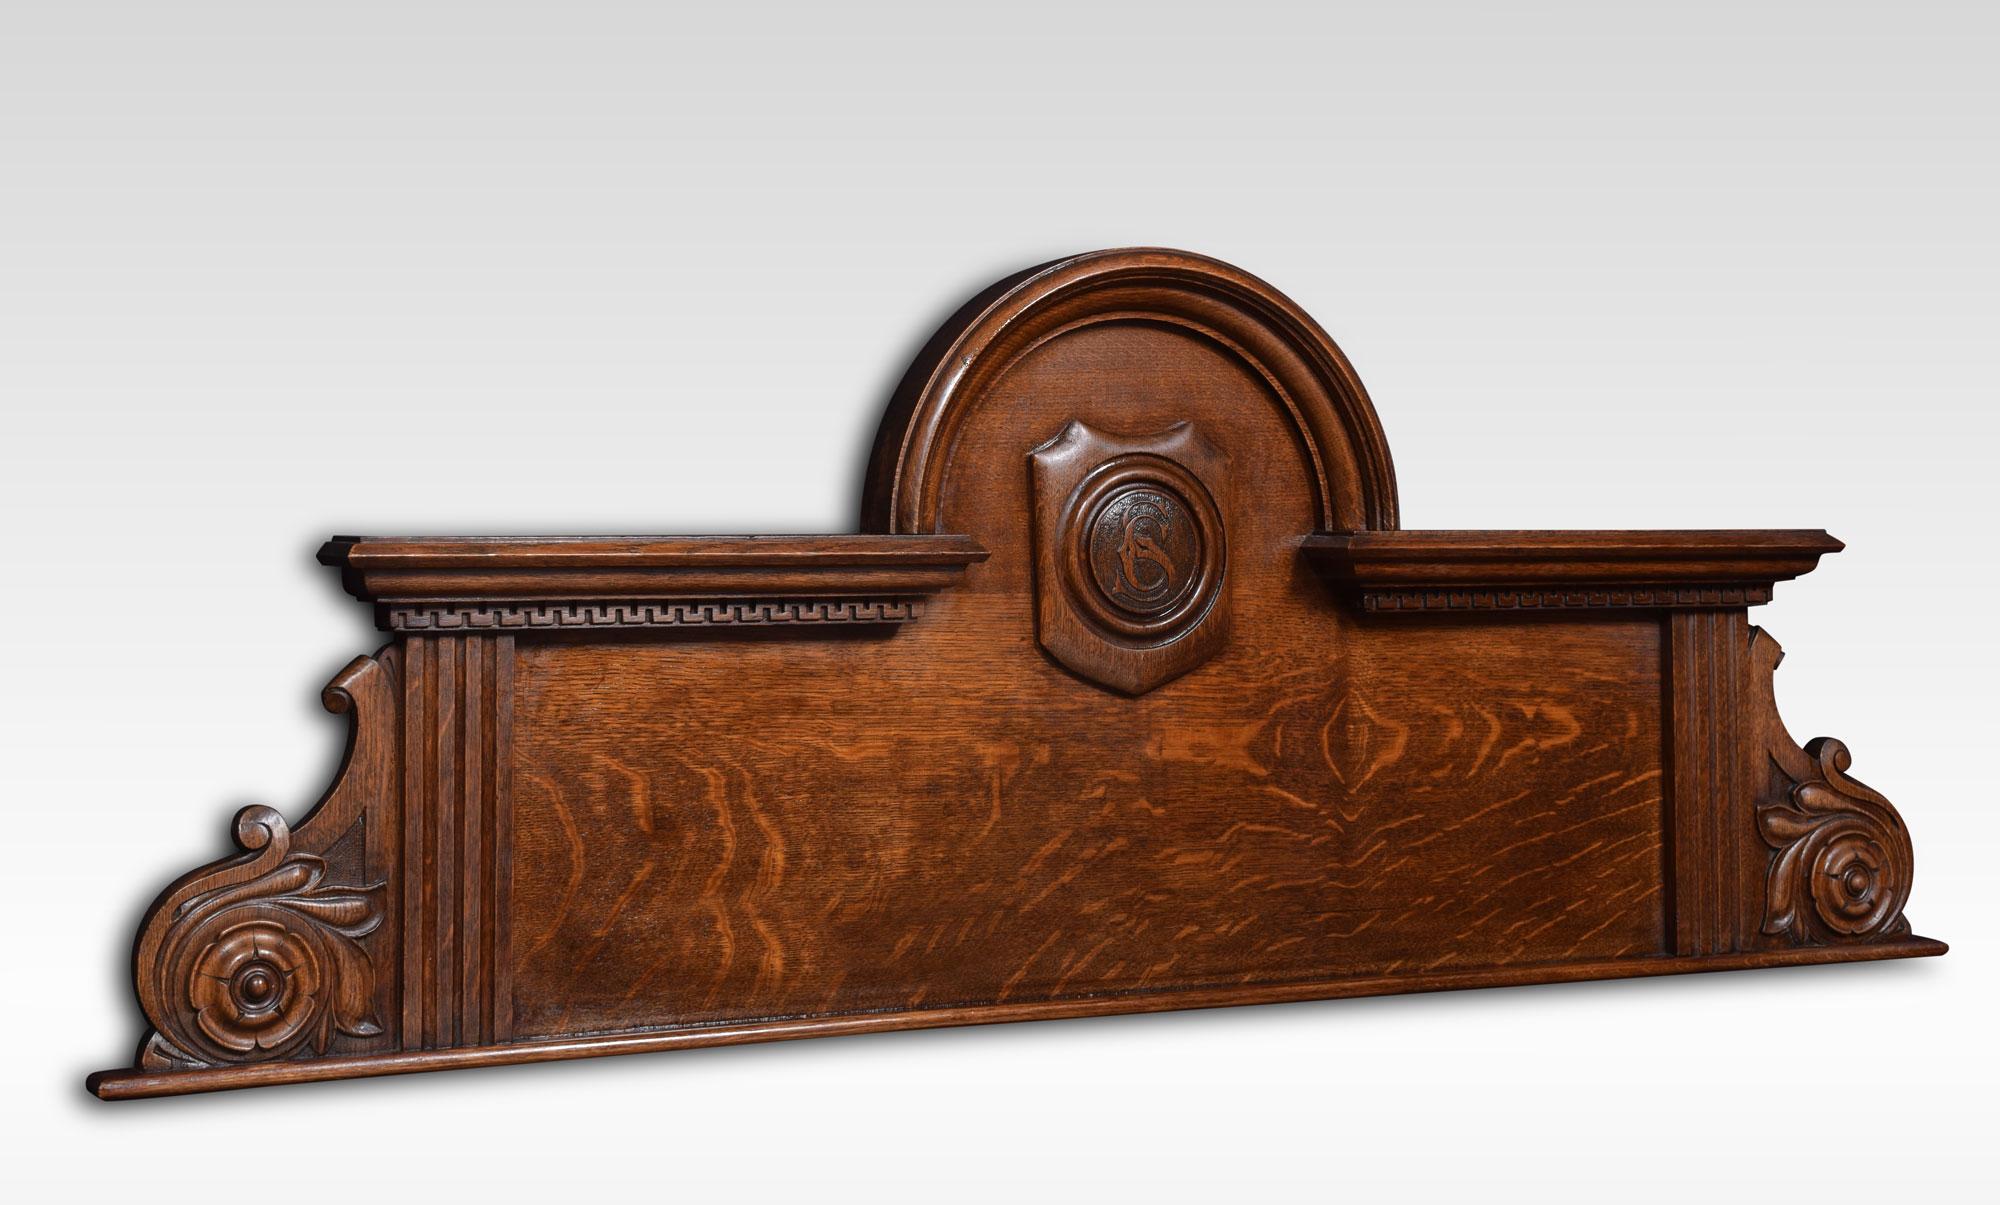 Oak overdoor pediment the arched centre above carved cartouche flanked by scrolling ends.
Dimensions:
Height 22.5 inches
Width 59.5 inches
Depth 3.5 inches.